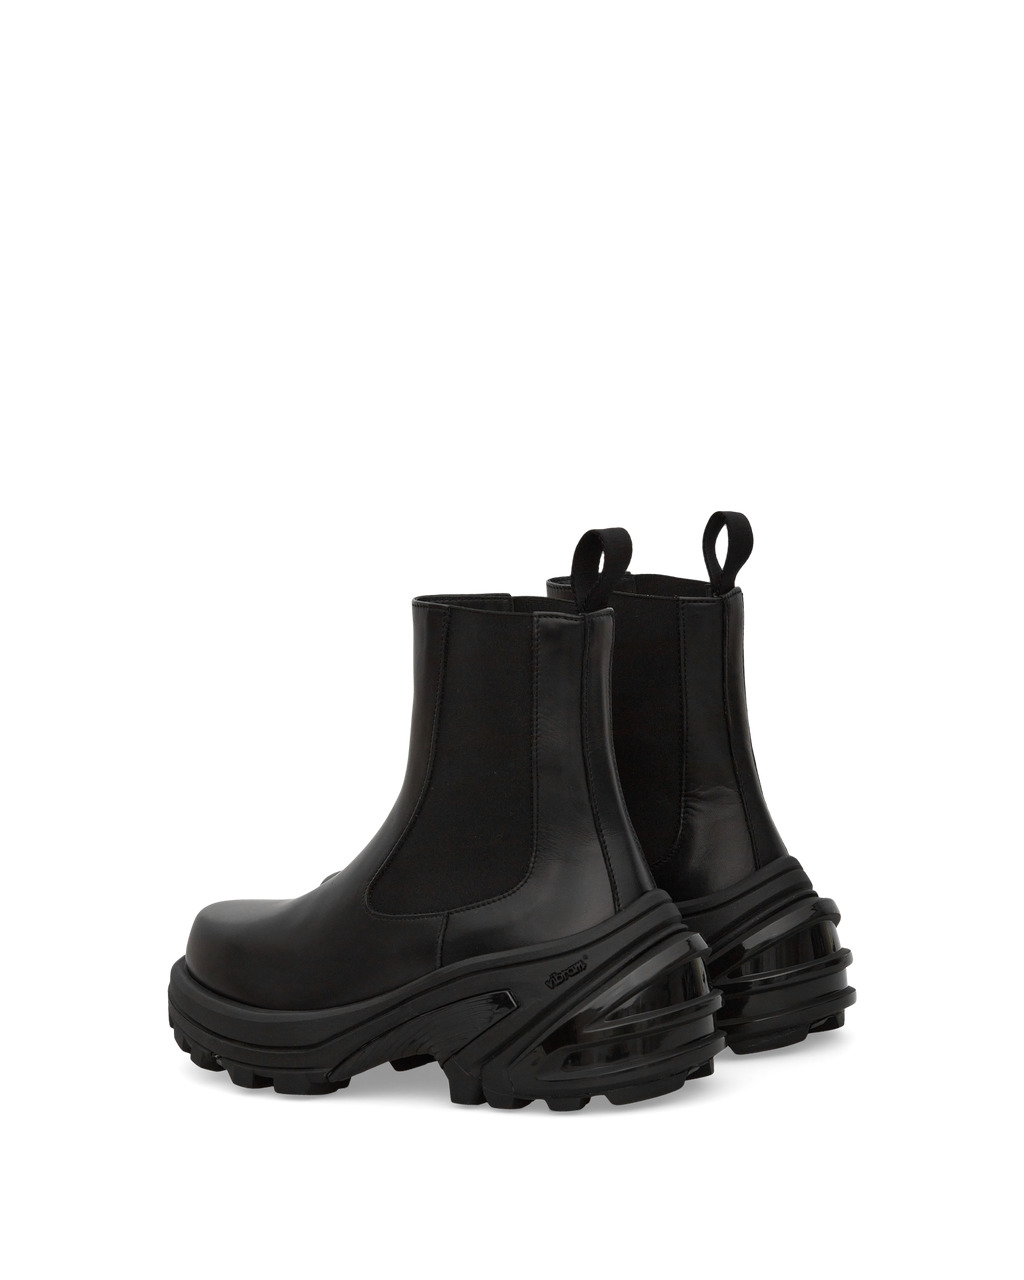 CHELSEA BOOT W/ REMOVABLE SKX SOLE - 4